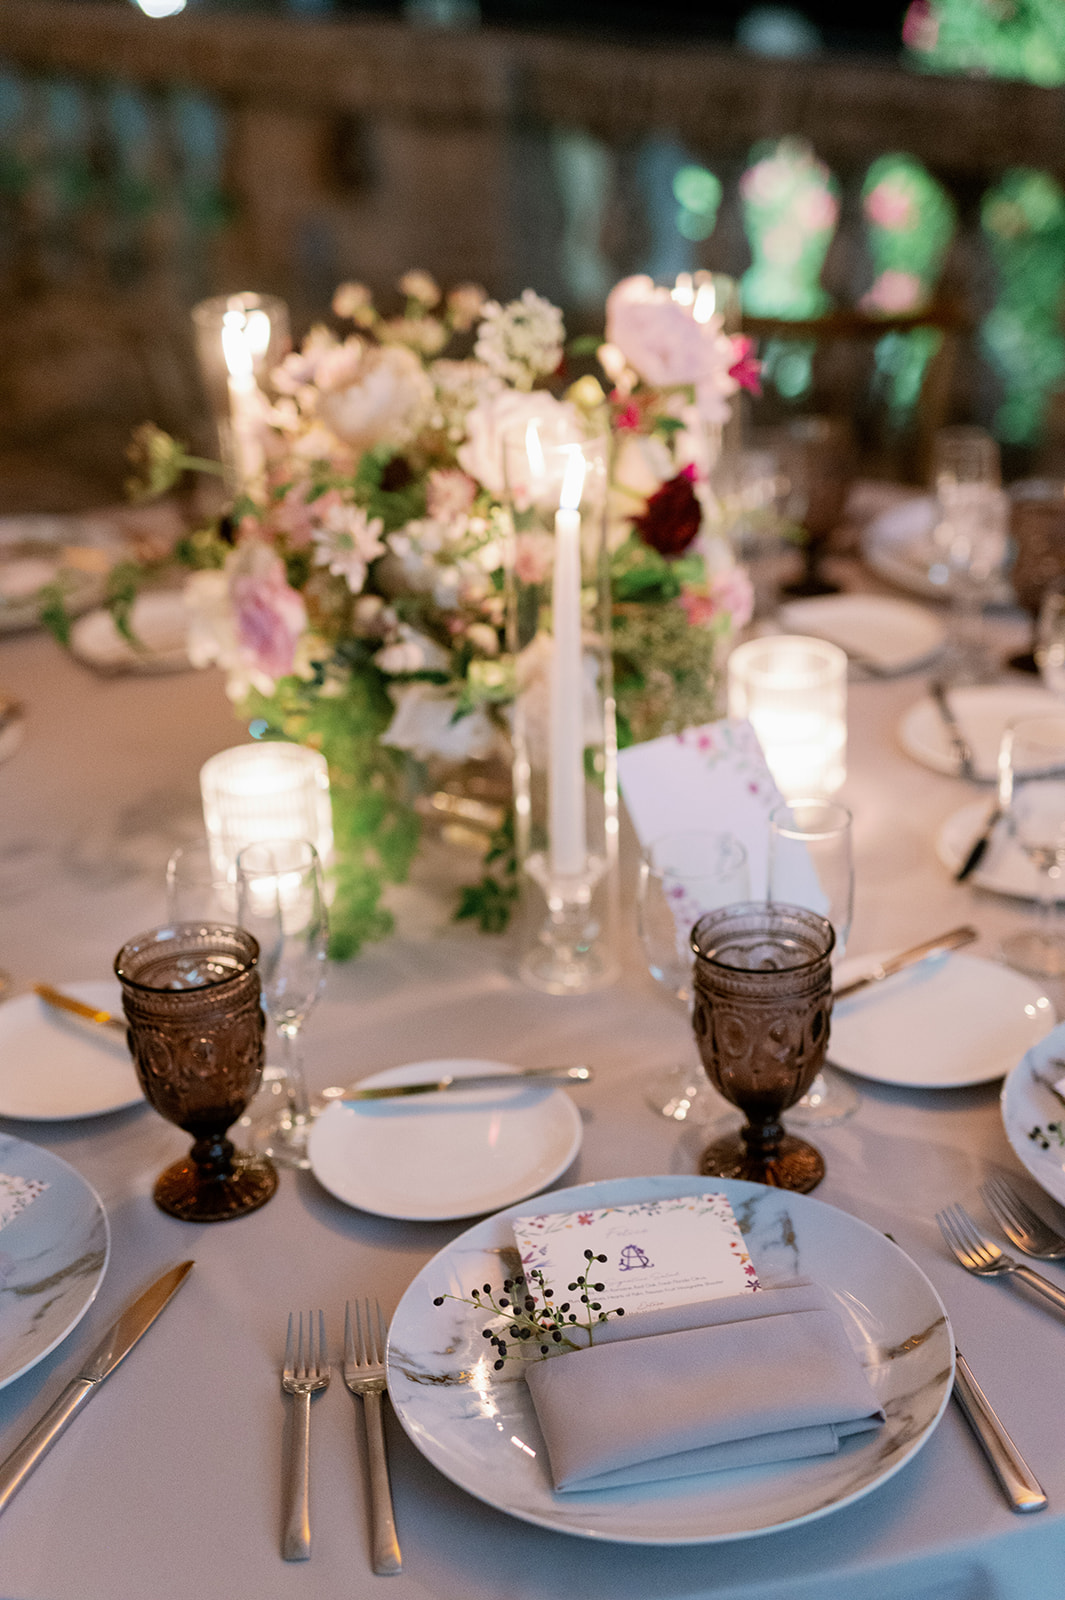 Ethereal candlelit wedding reception dinner at Vizcaya Museum and Gardens.